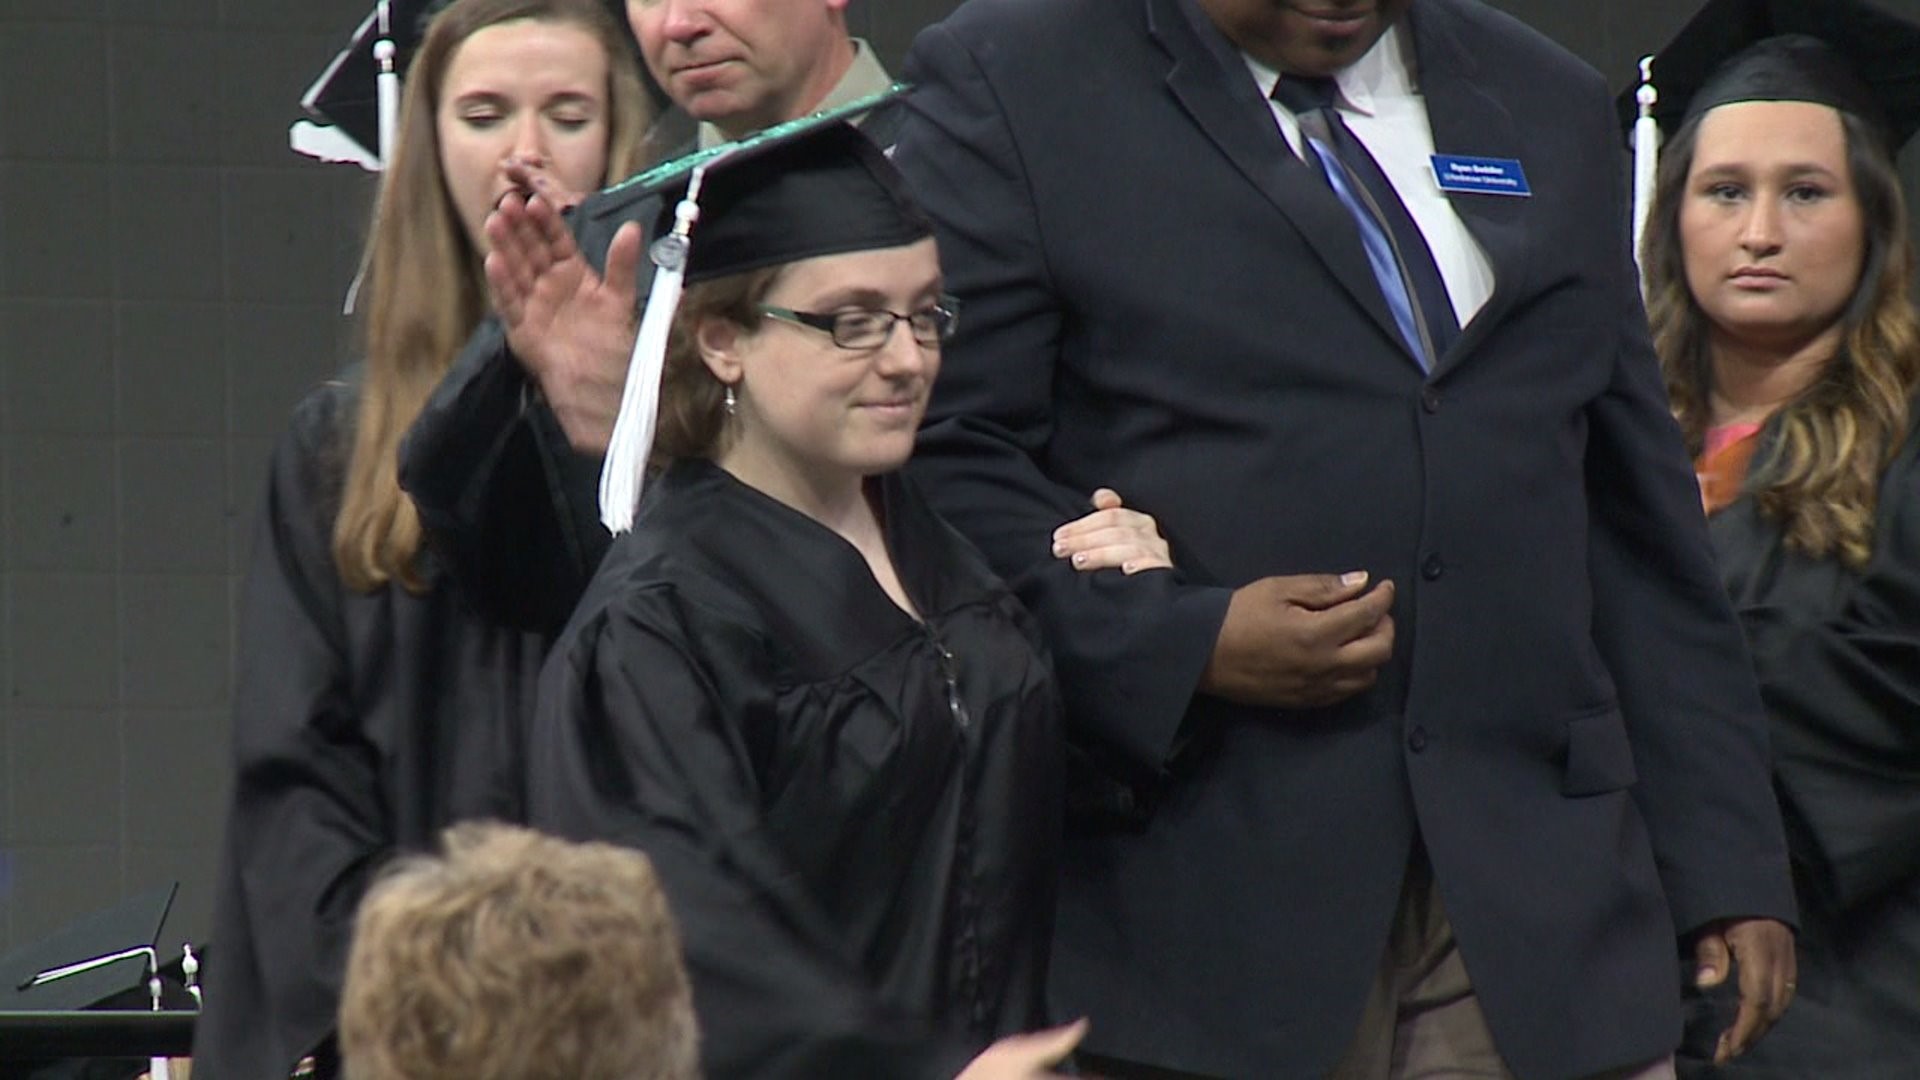 St. Ambrose student walks across graduation stage without her